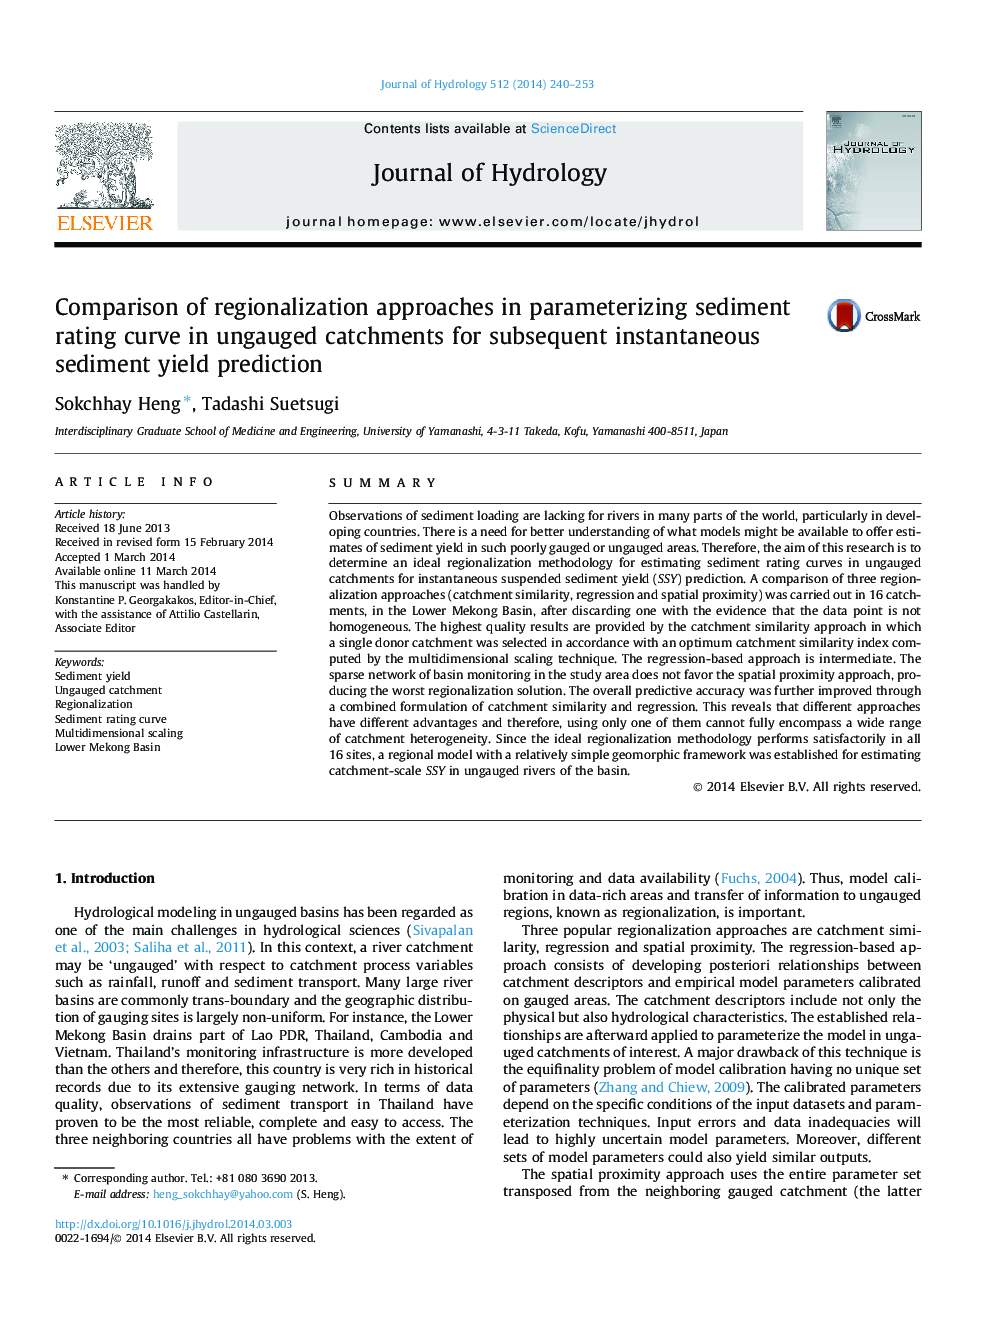 Comparison of regionalization approaches in parameterizing sediment rating curve in ungauged catchments for subsequent instantaneous sediment yield prediction